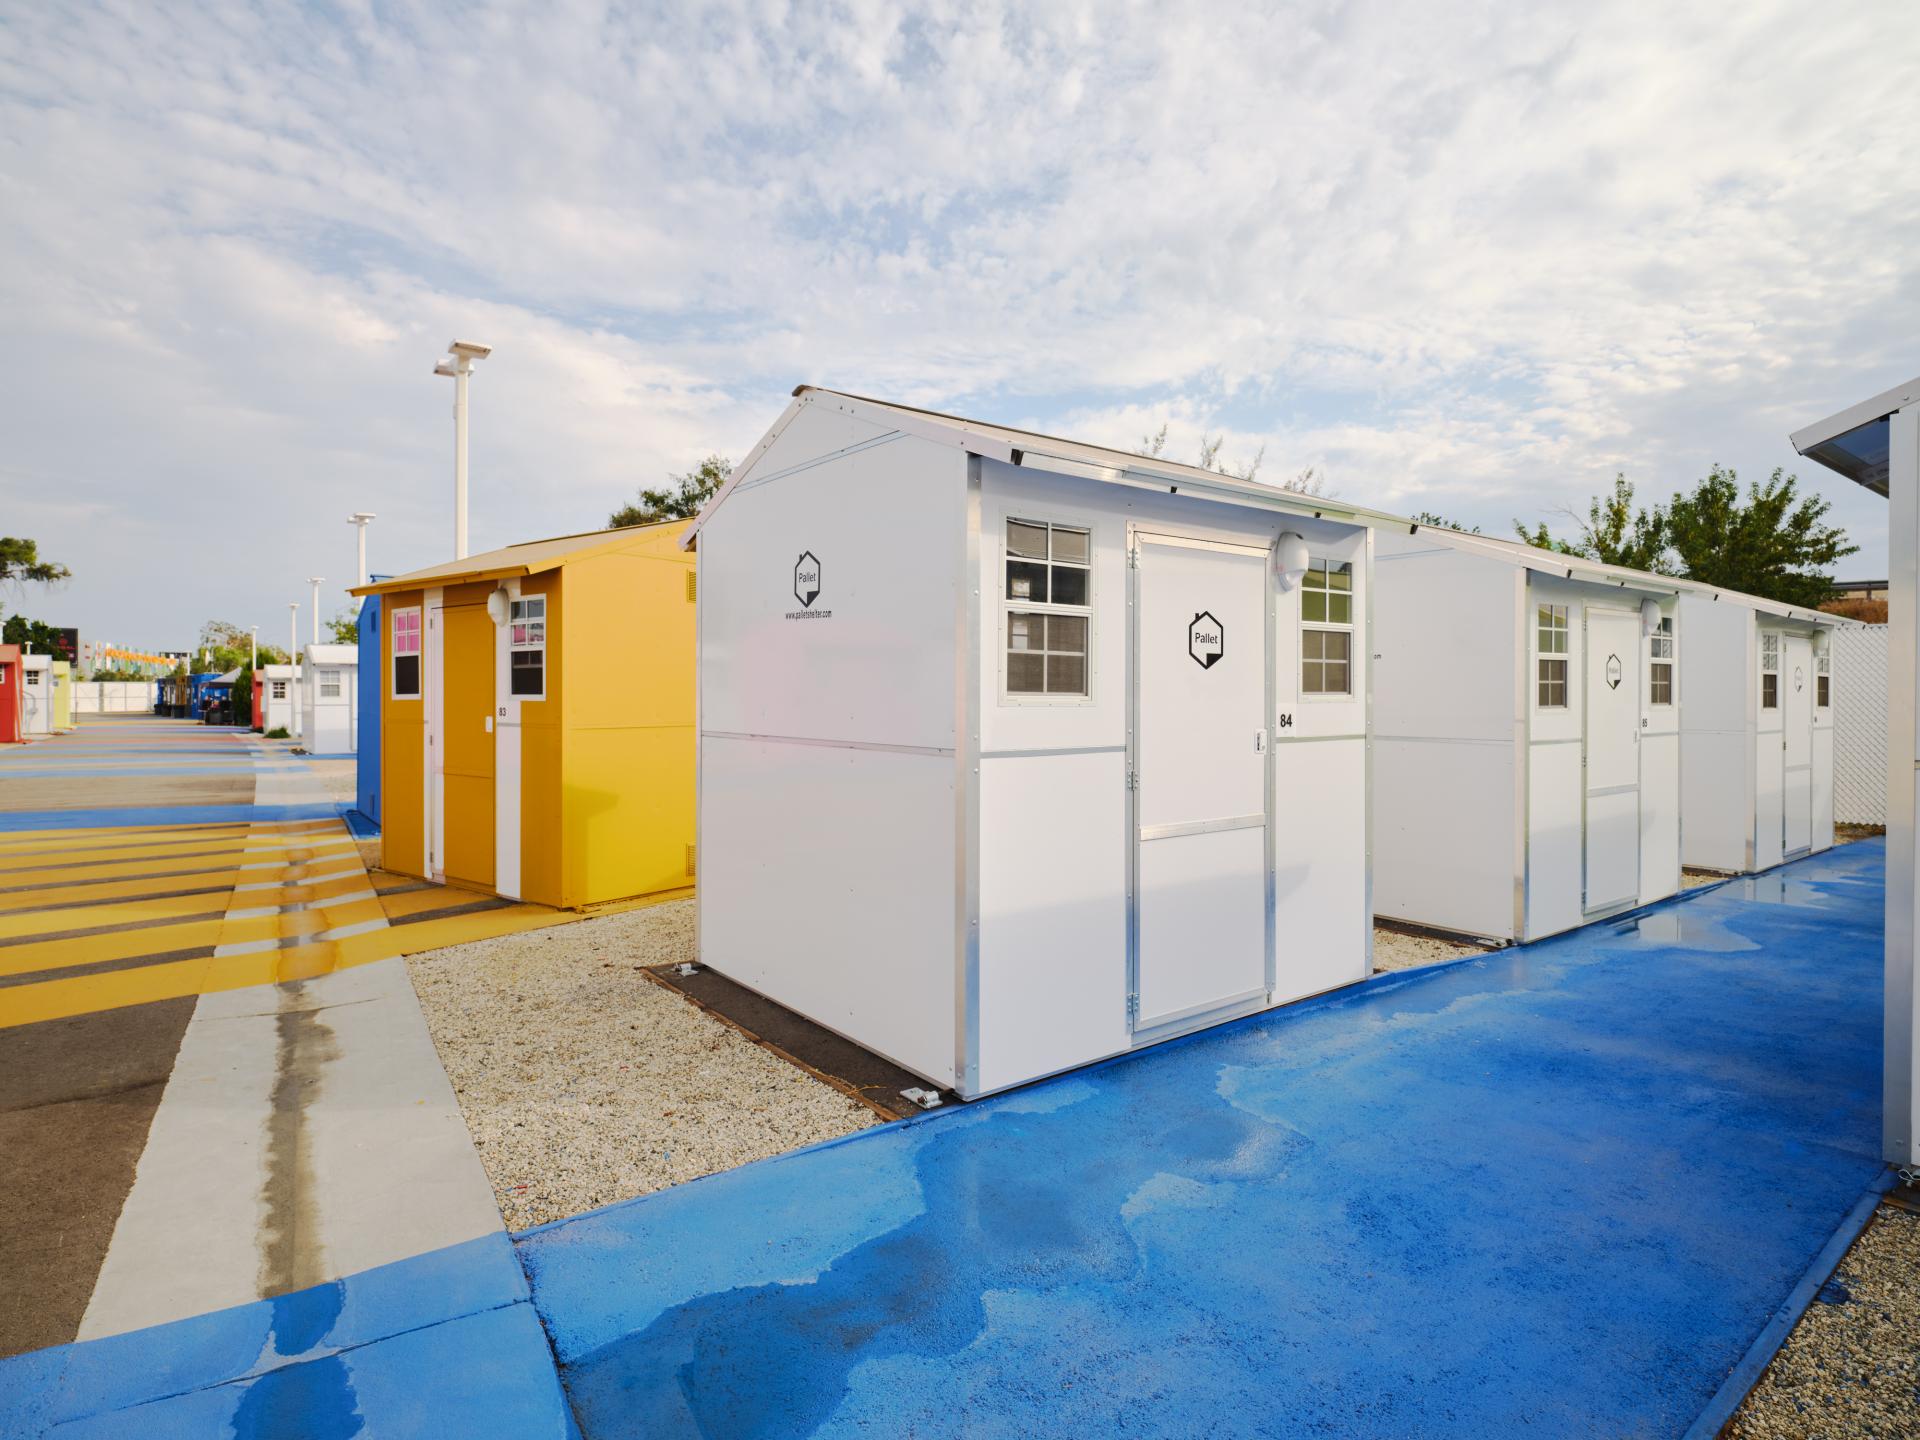 Pallet brand cabins, painted colorfully